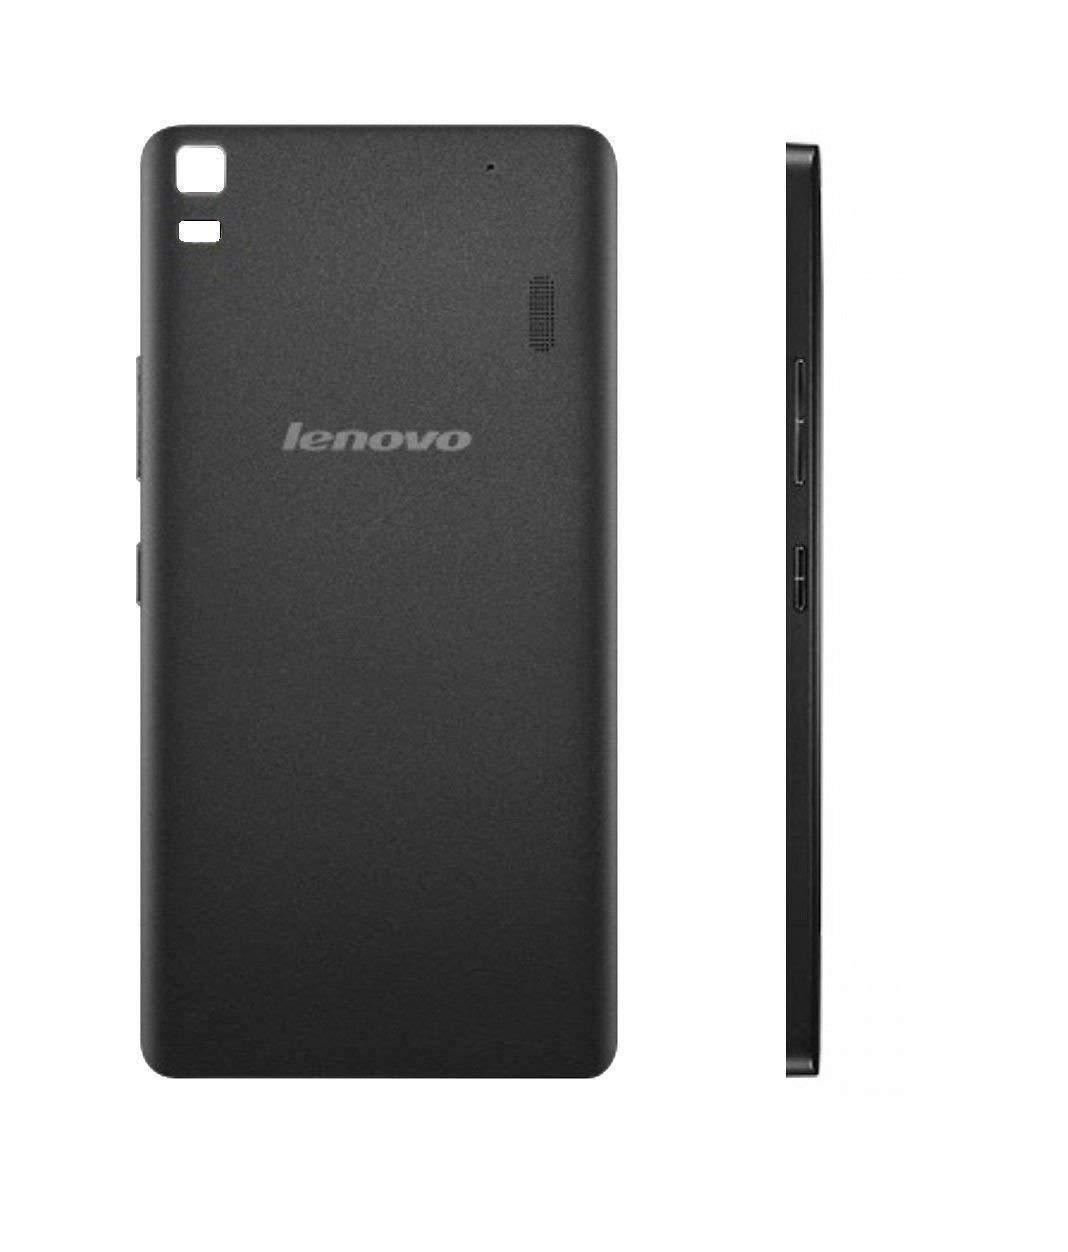 Dealsplant Back cover Replacement door for Lenovo A7000 / Lenovo K3 Note-Mobile Accessories-dealsplant